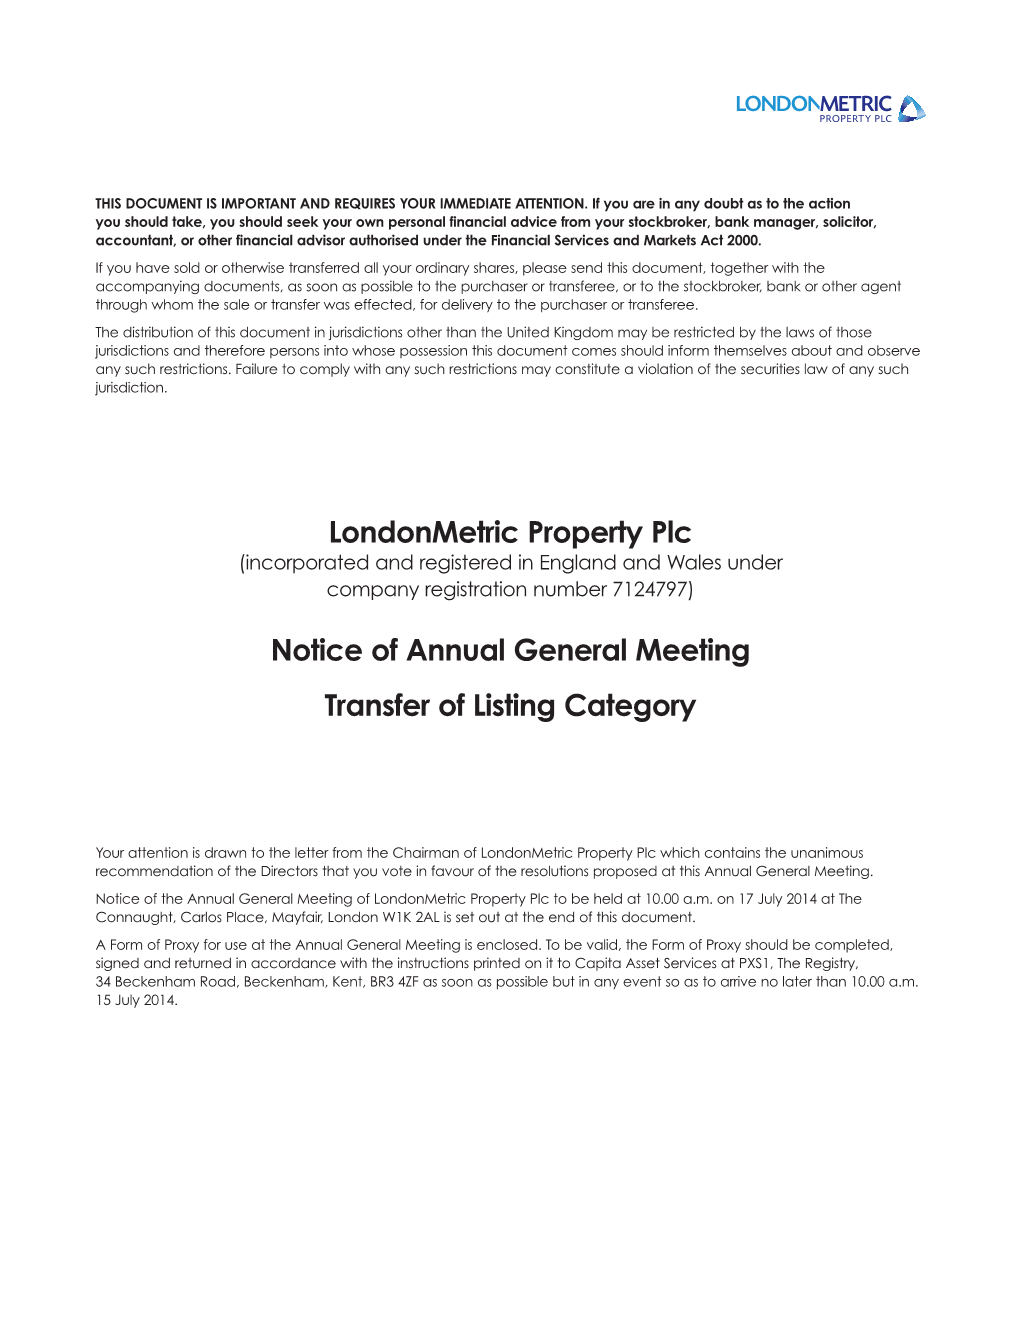 Londonmetric Property Plc Notice of Annual General Meeting Transfer Of